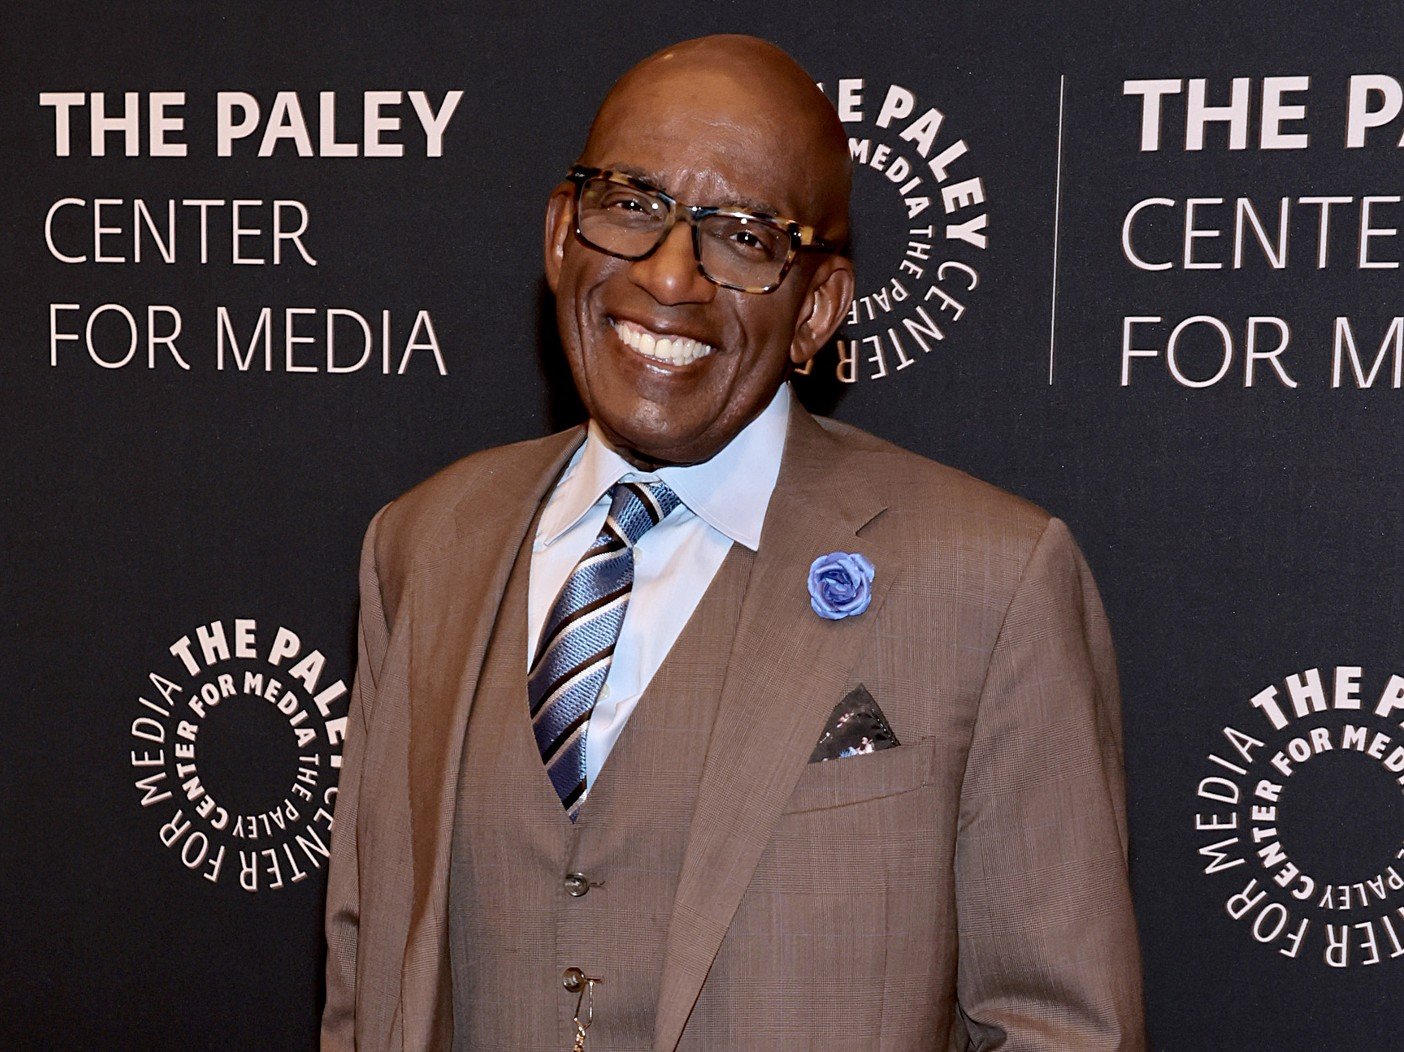 Al Roker’s latest photo of his Paris trip is a must-see